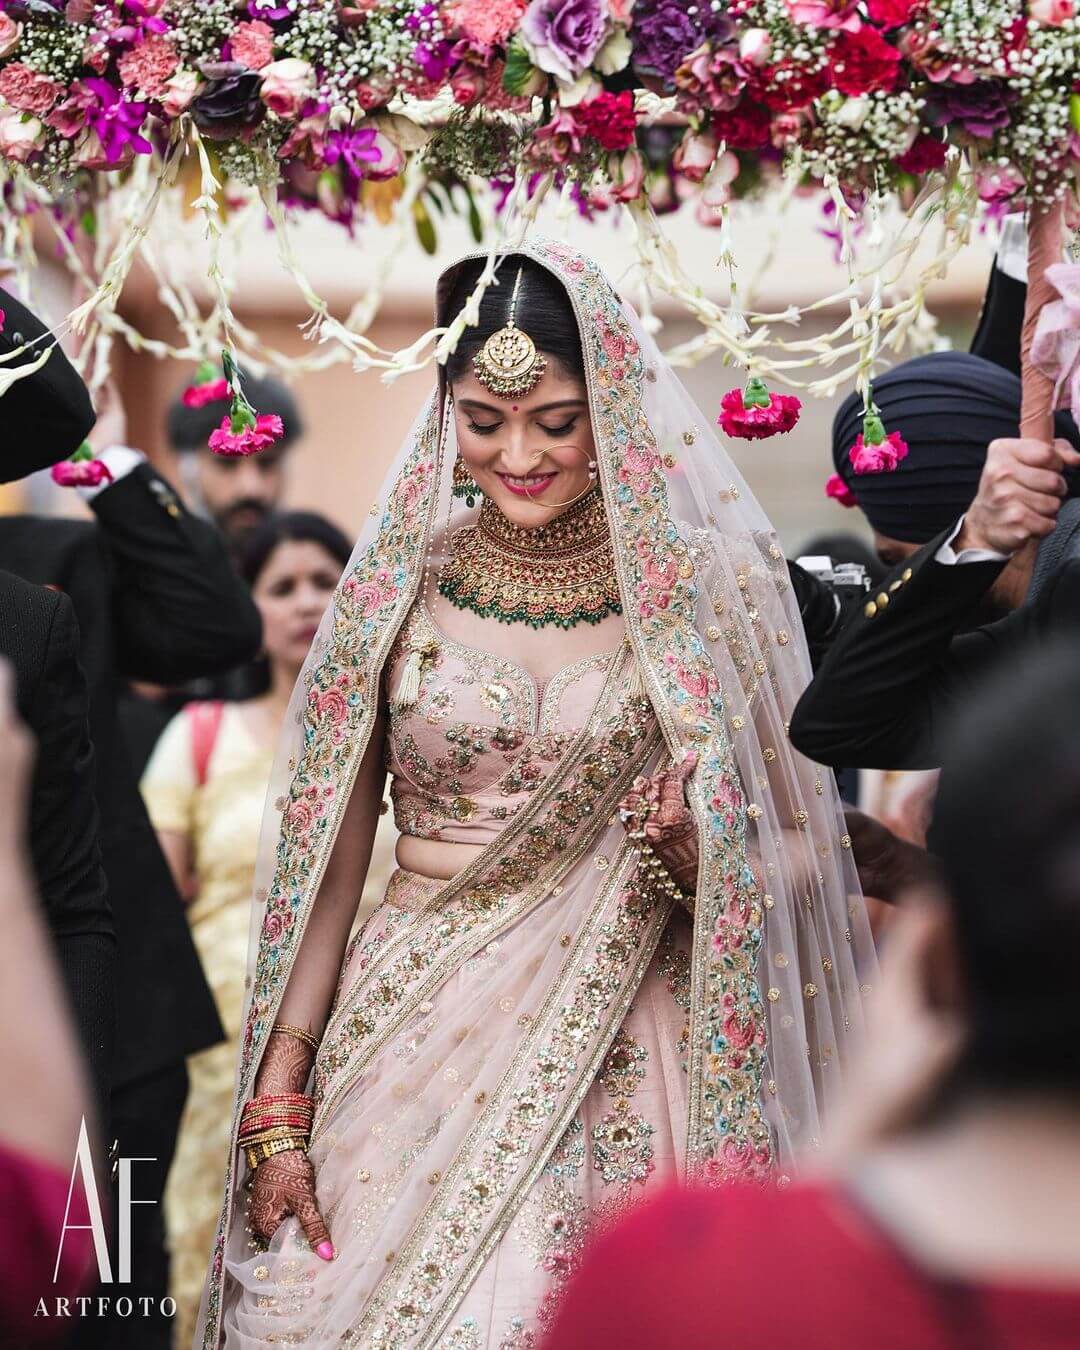 Anushka Sharma's Dreamy Wedding Look: A Bride Recreating the Perfect Look in Pale Pink Sabyasachi!